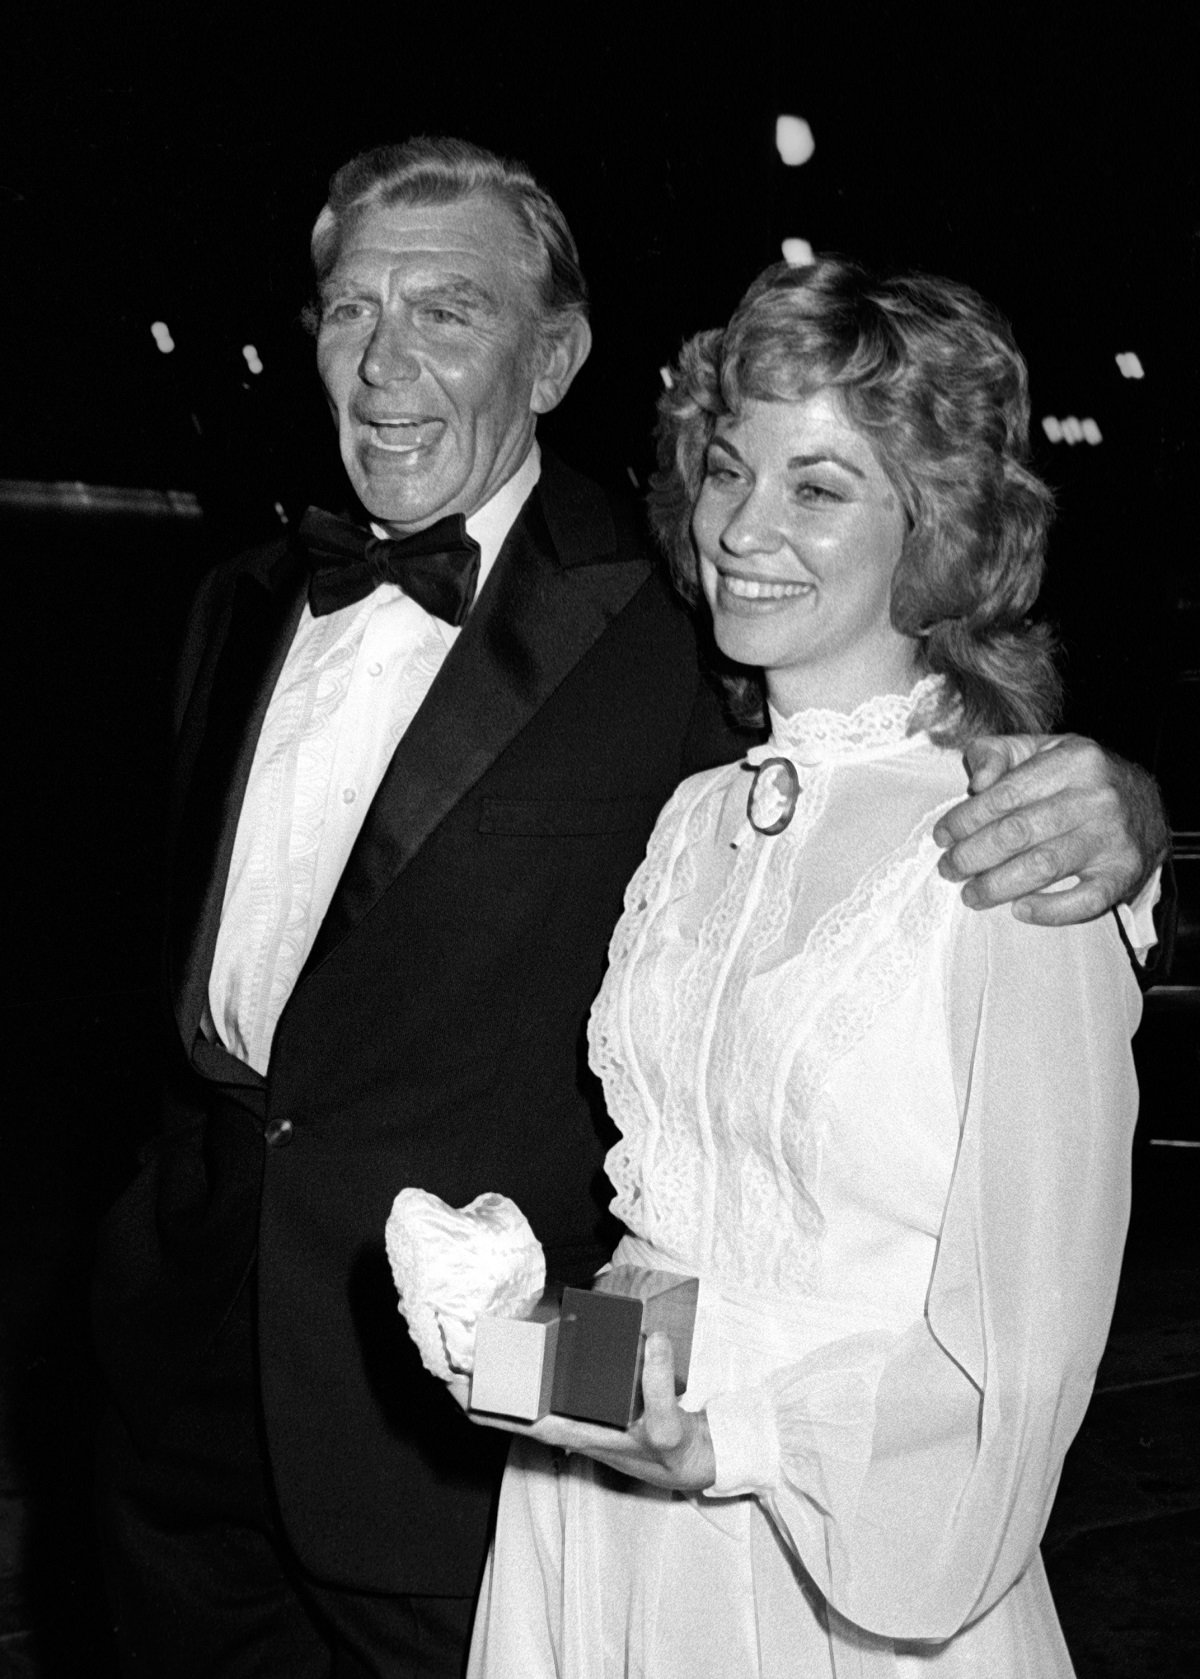 who was andy griffith married to